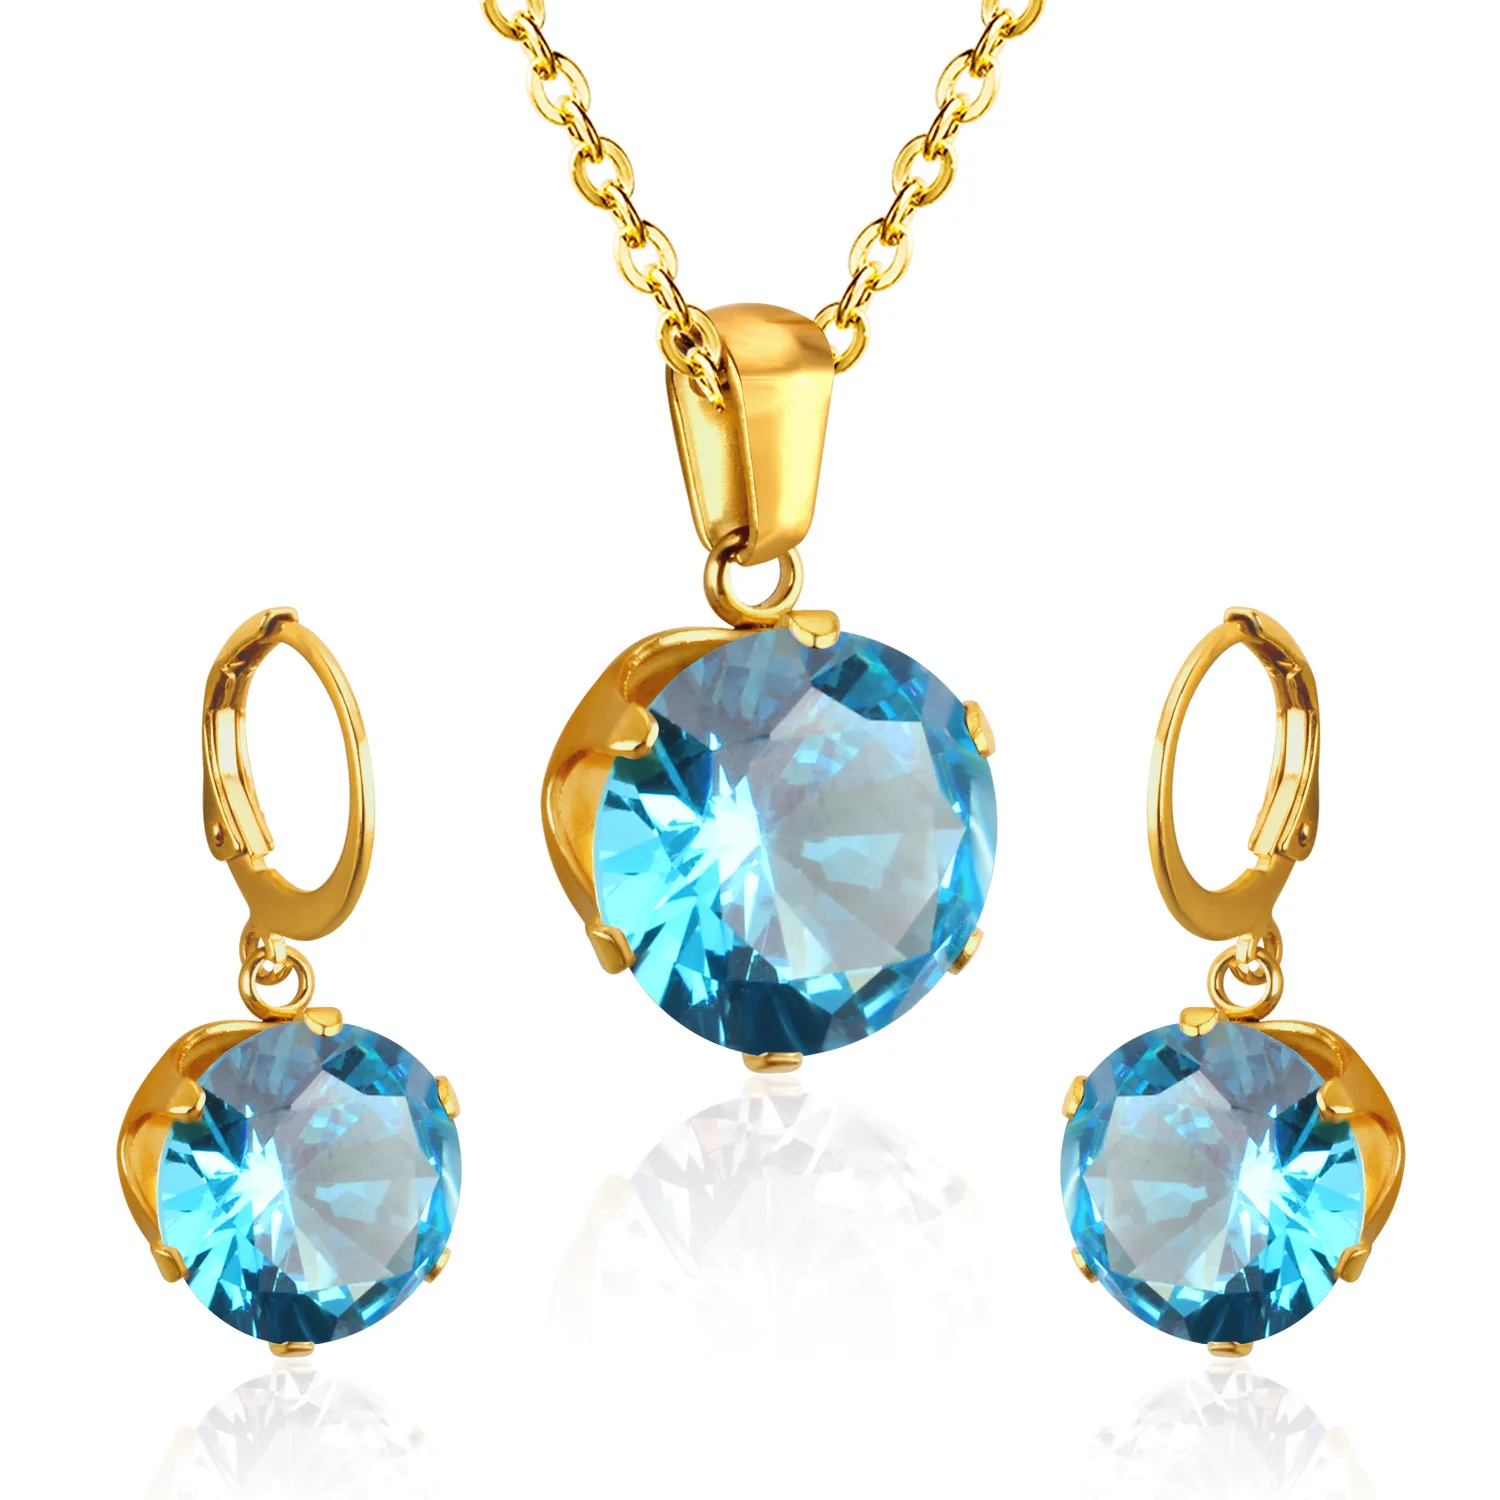 LUXUKISSKIDS Luxury Gold Color Bridal Jewelry Sets & More for Women Wedding with High Quality AAA Zircon 3